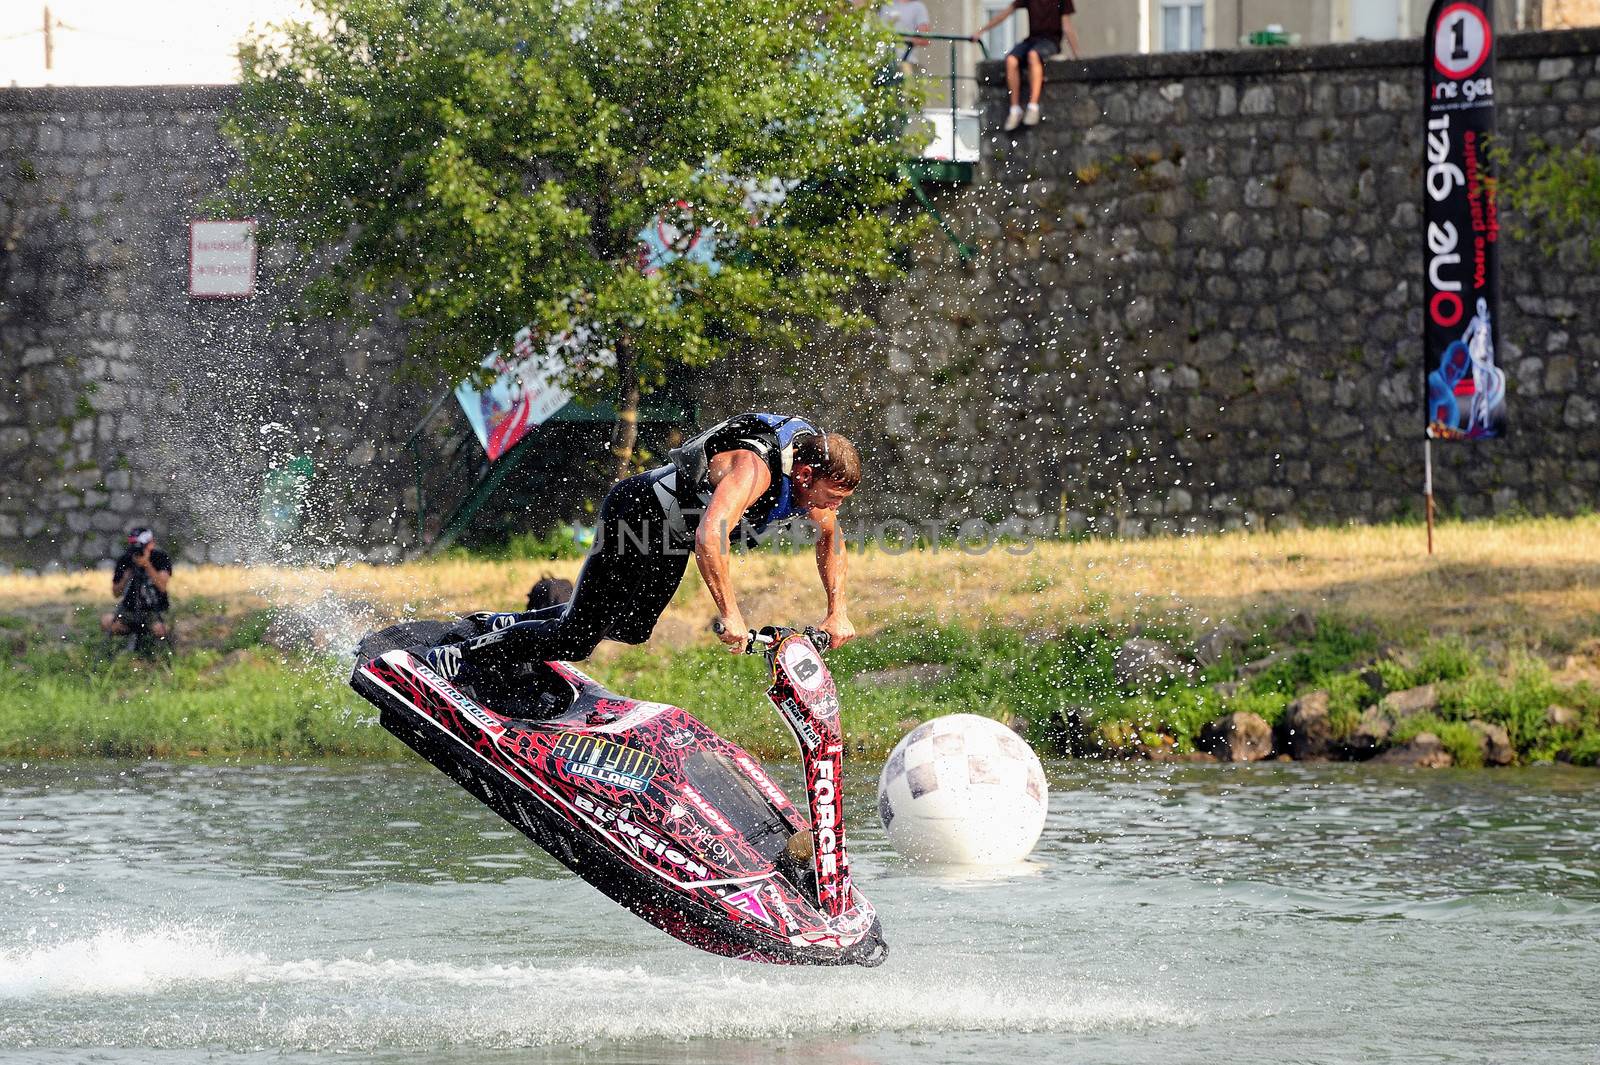 Ales - France - on July 14th, 2013 - Championship of France of Jet Ski on the river Gardon. lifting category or freestyle